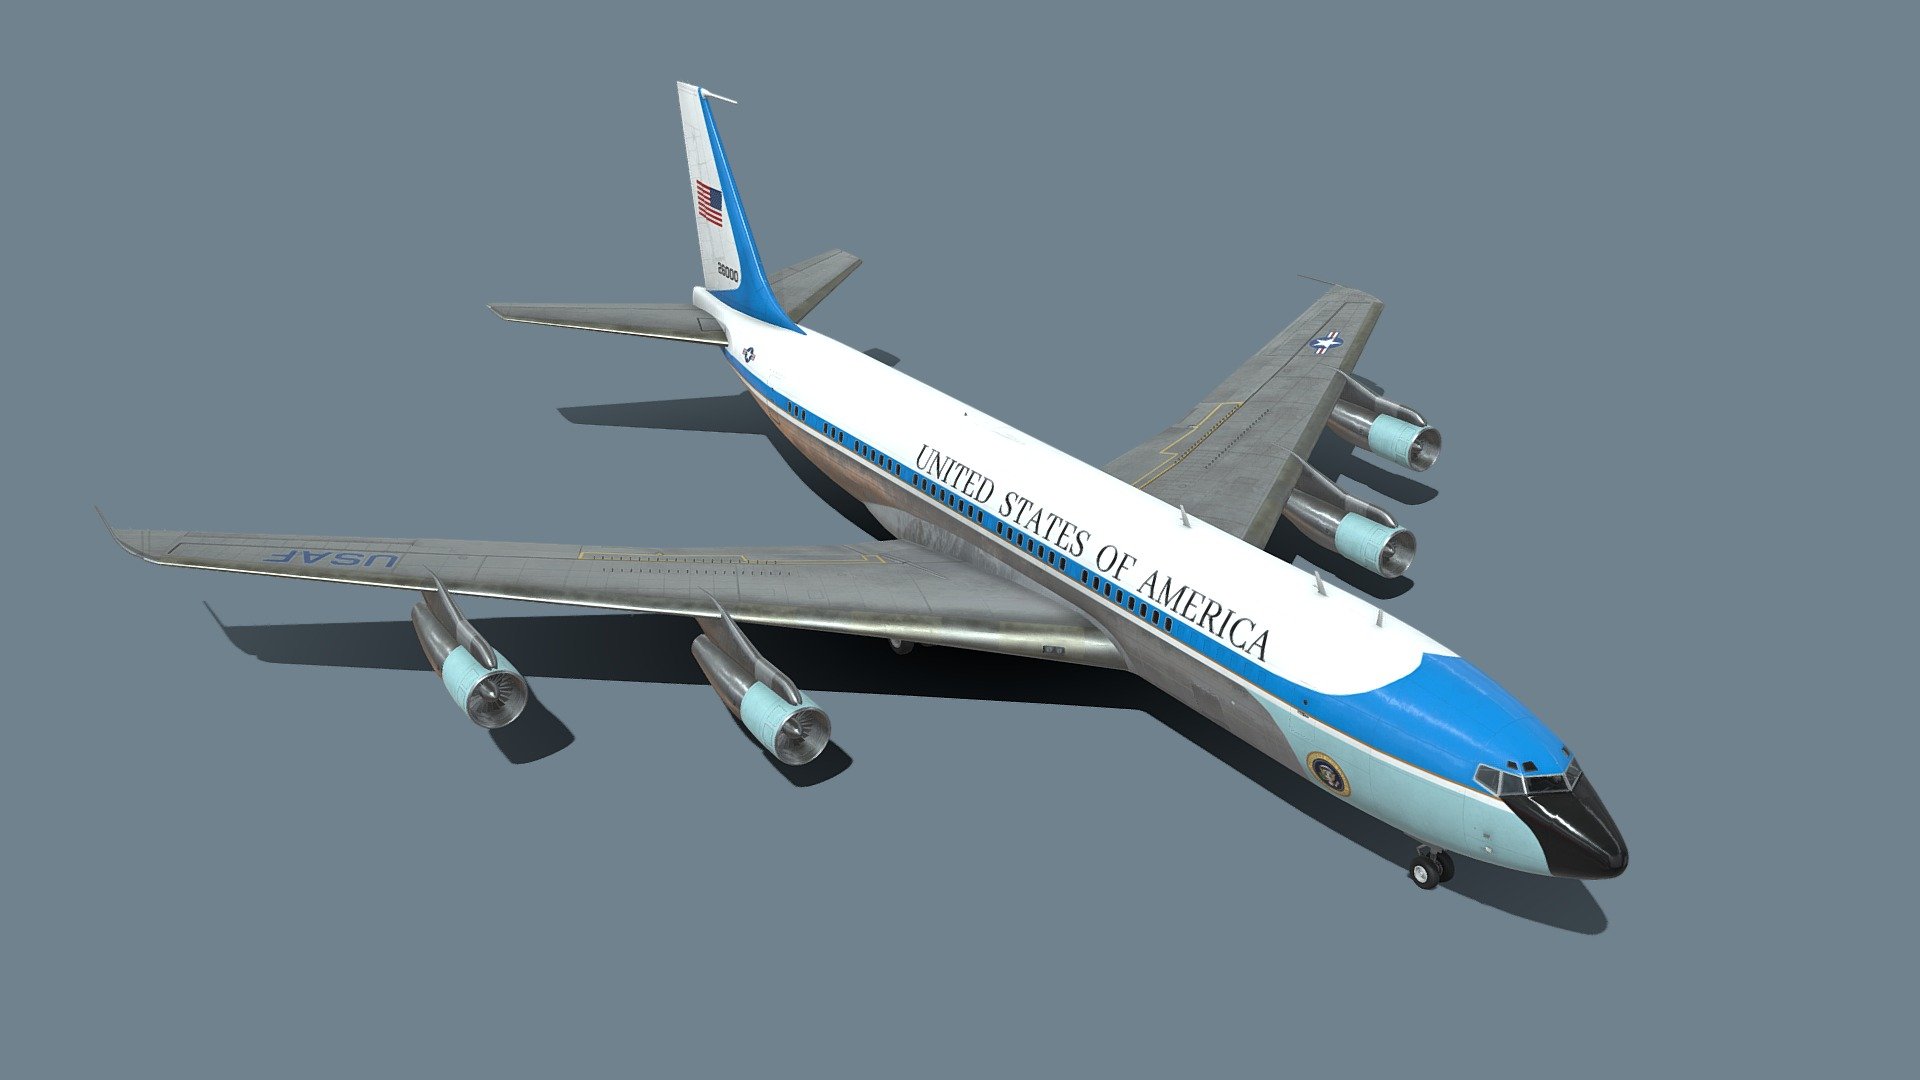 Purchase link is here https://www.artstation.com/artwork/LeEbZR

SAM 26000 was the first of two Boeing VC-137C United States Air Force aircraft specifically configured and maintained for use by the president of the United States. It used the callsign Air Force One when the president was on board, otherwise SAM 26000 , with SAM indicating Special Air Mission.

A VC-137C with Air Force serial number 62-6000,[a] SAM 26000 was a customized Boeing 707. It entered service in 1962 during the administration of John F. Kennedy and was replaced in presidential service in 1972 but kept as a backup. The aircraft was finally retired in 1998 and is now on display at the National Museum of the United States Air Force near Dayton, Ohio 3d model